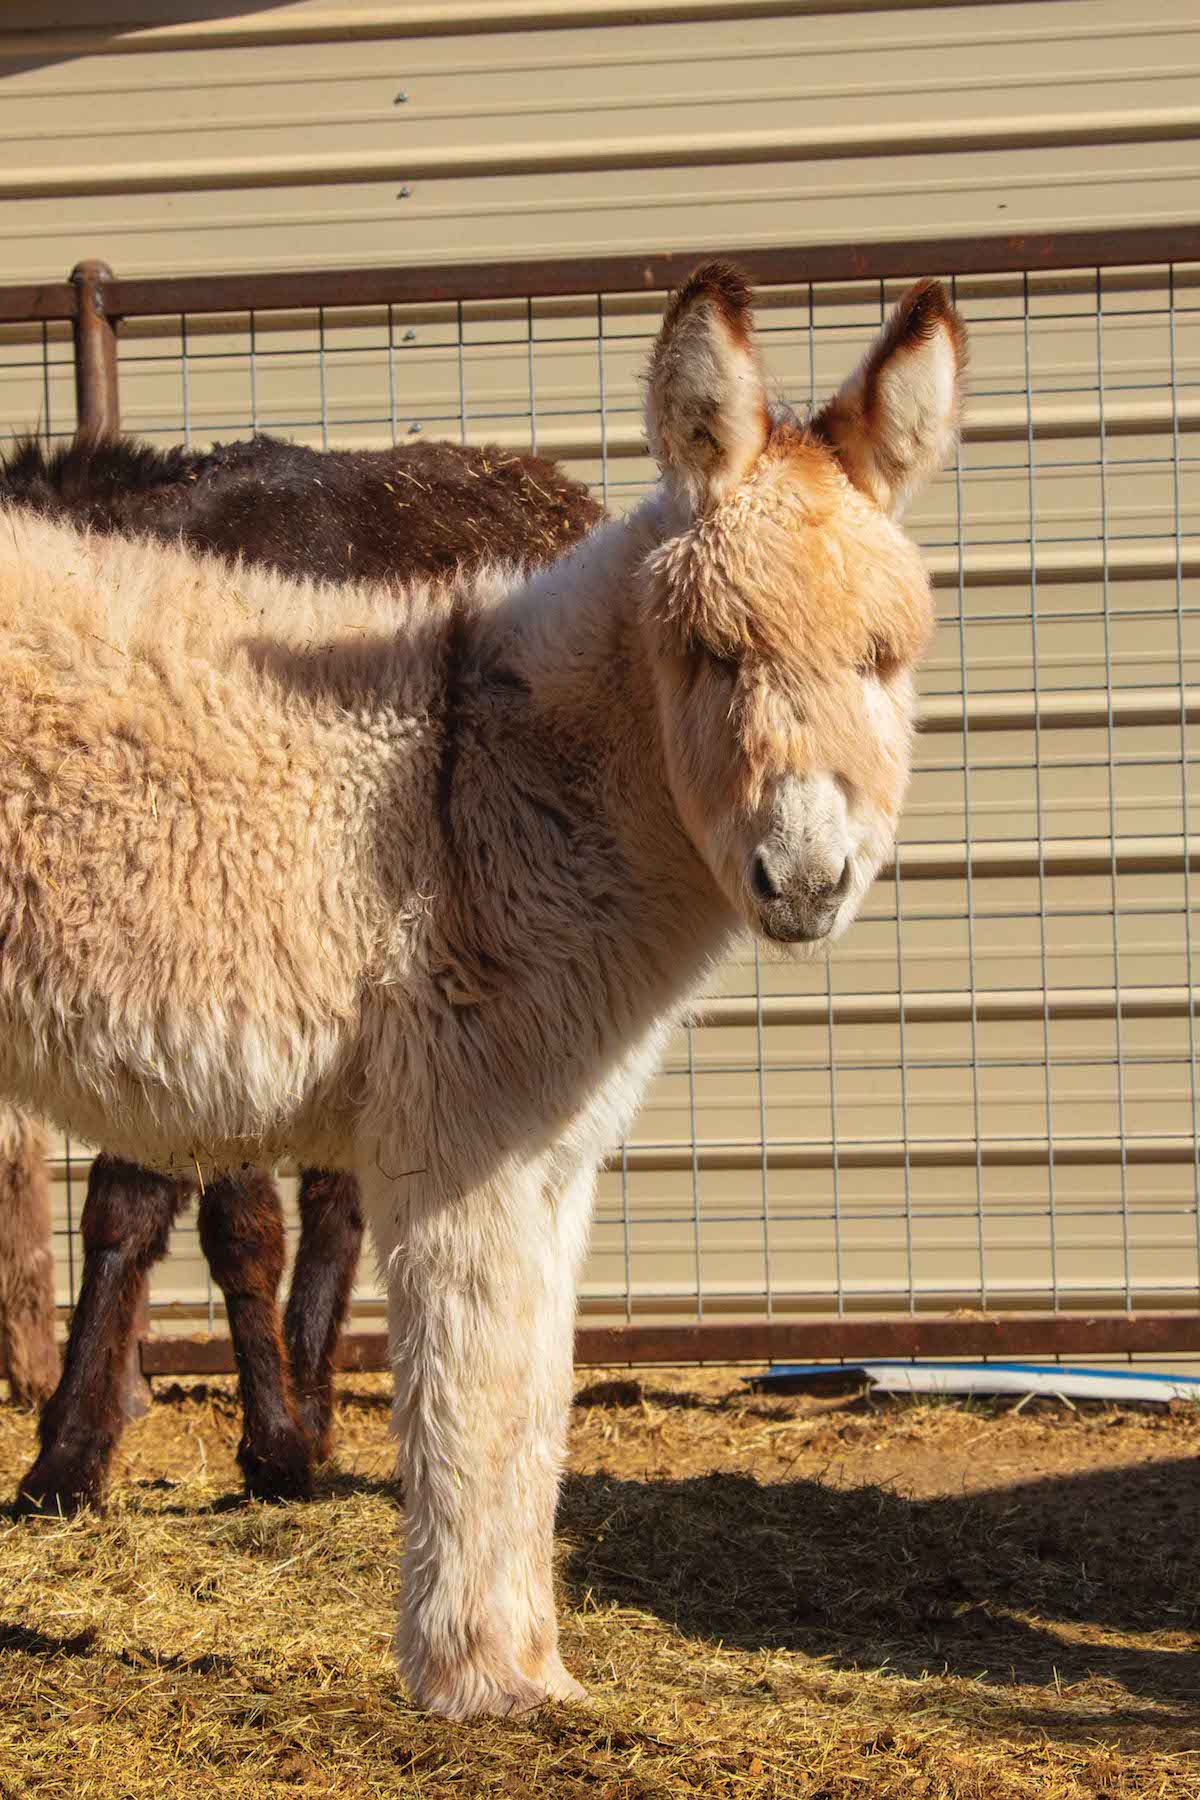 An image of the donkey named after Betty White